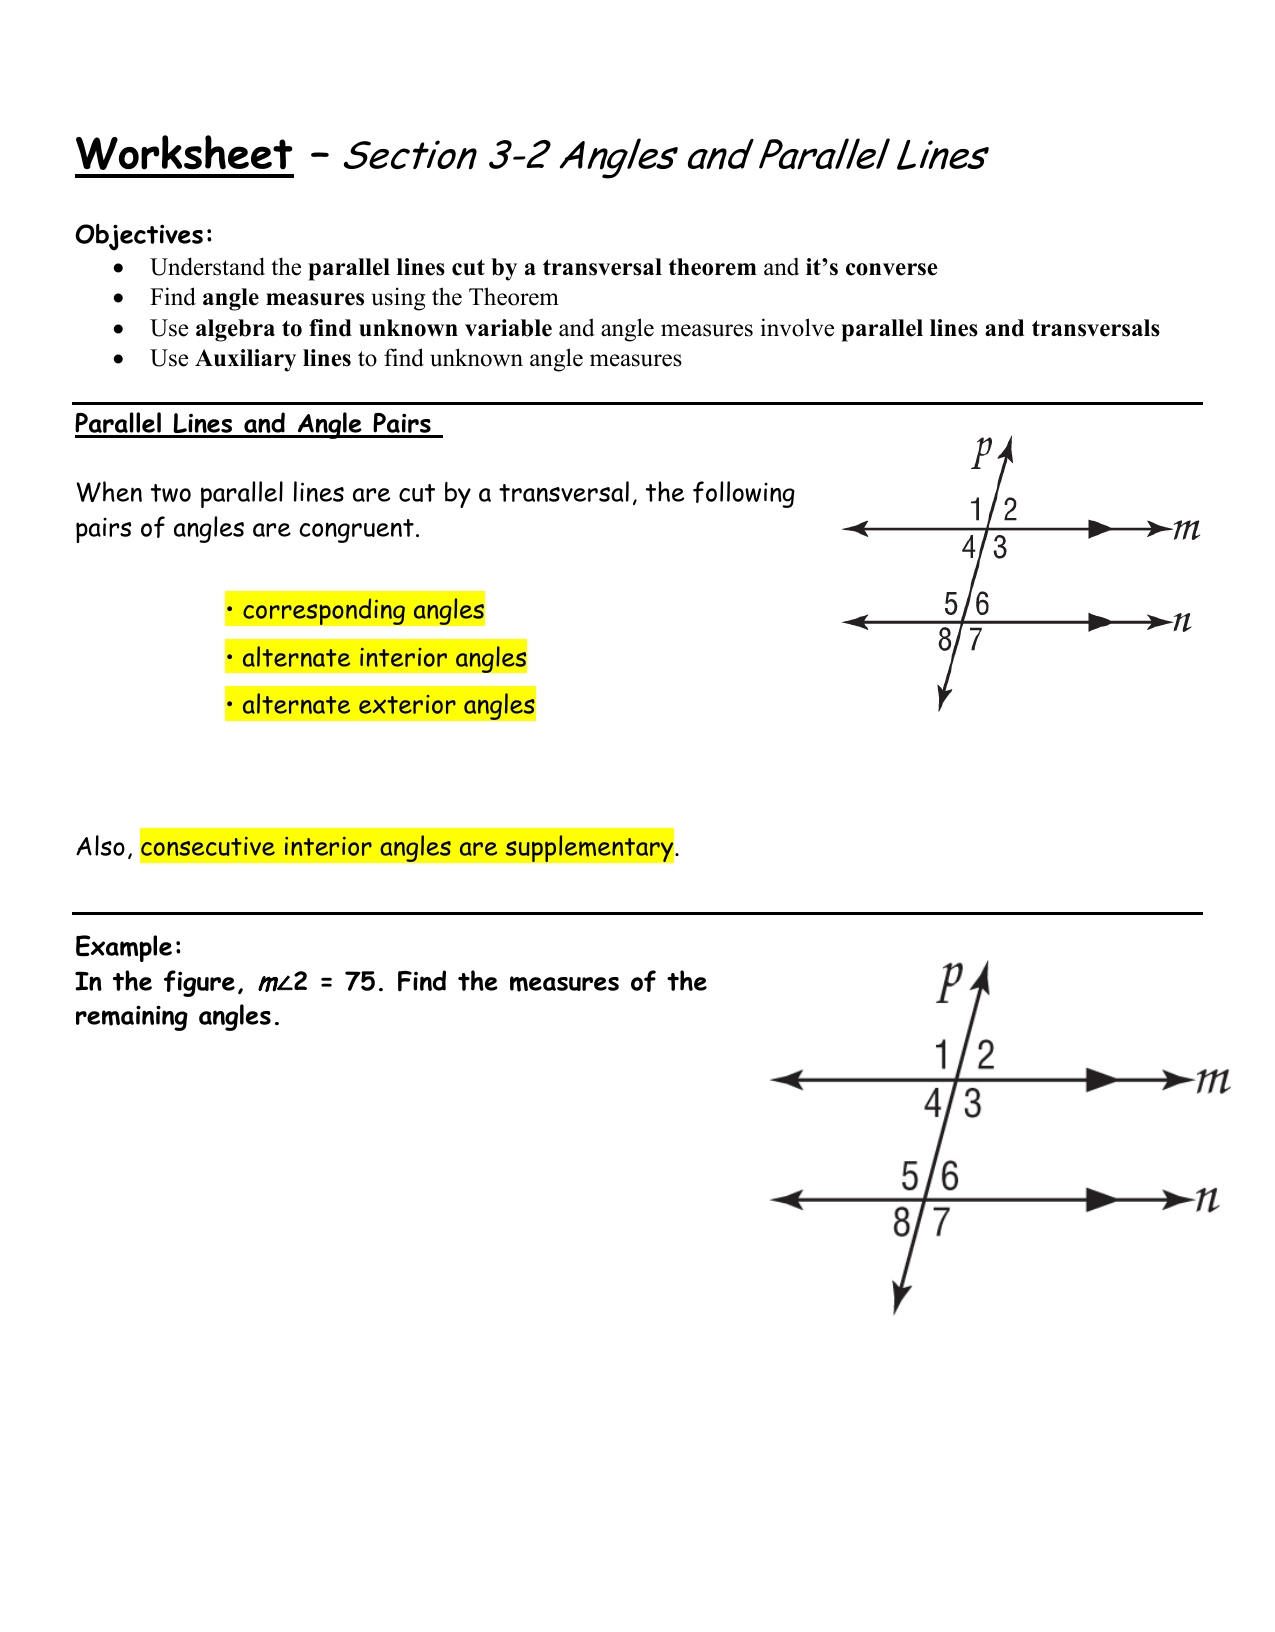 Worksheet Section 24 Angles and Parallel Lines With Regard To Lines And Angles Worksheet